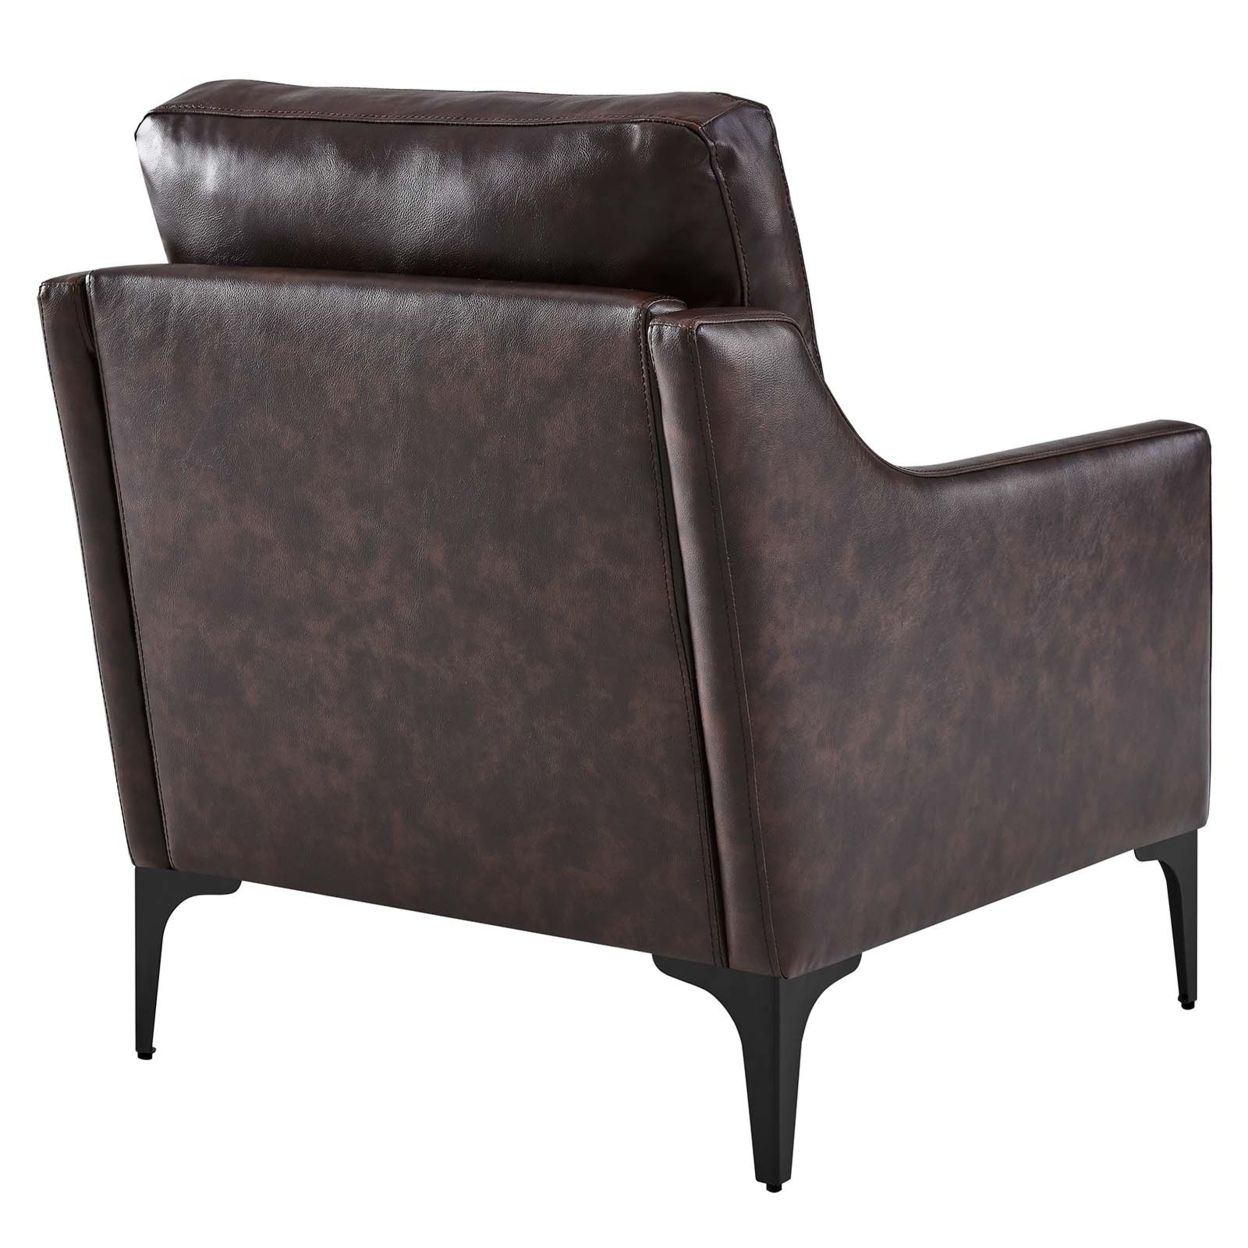 Corland Leather Armchair, Brown